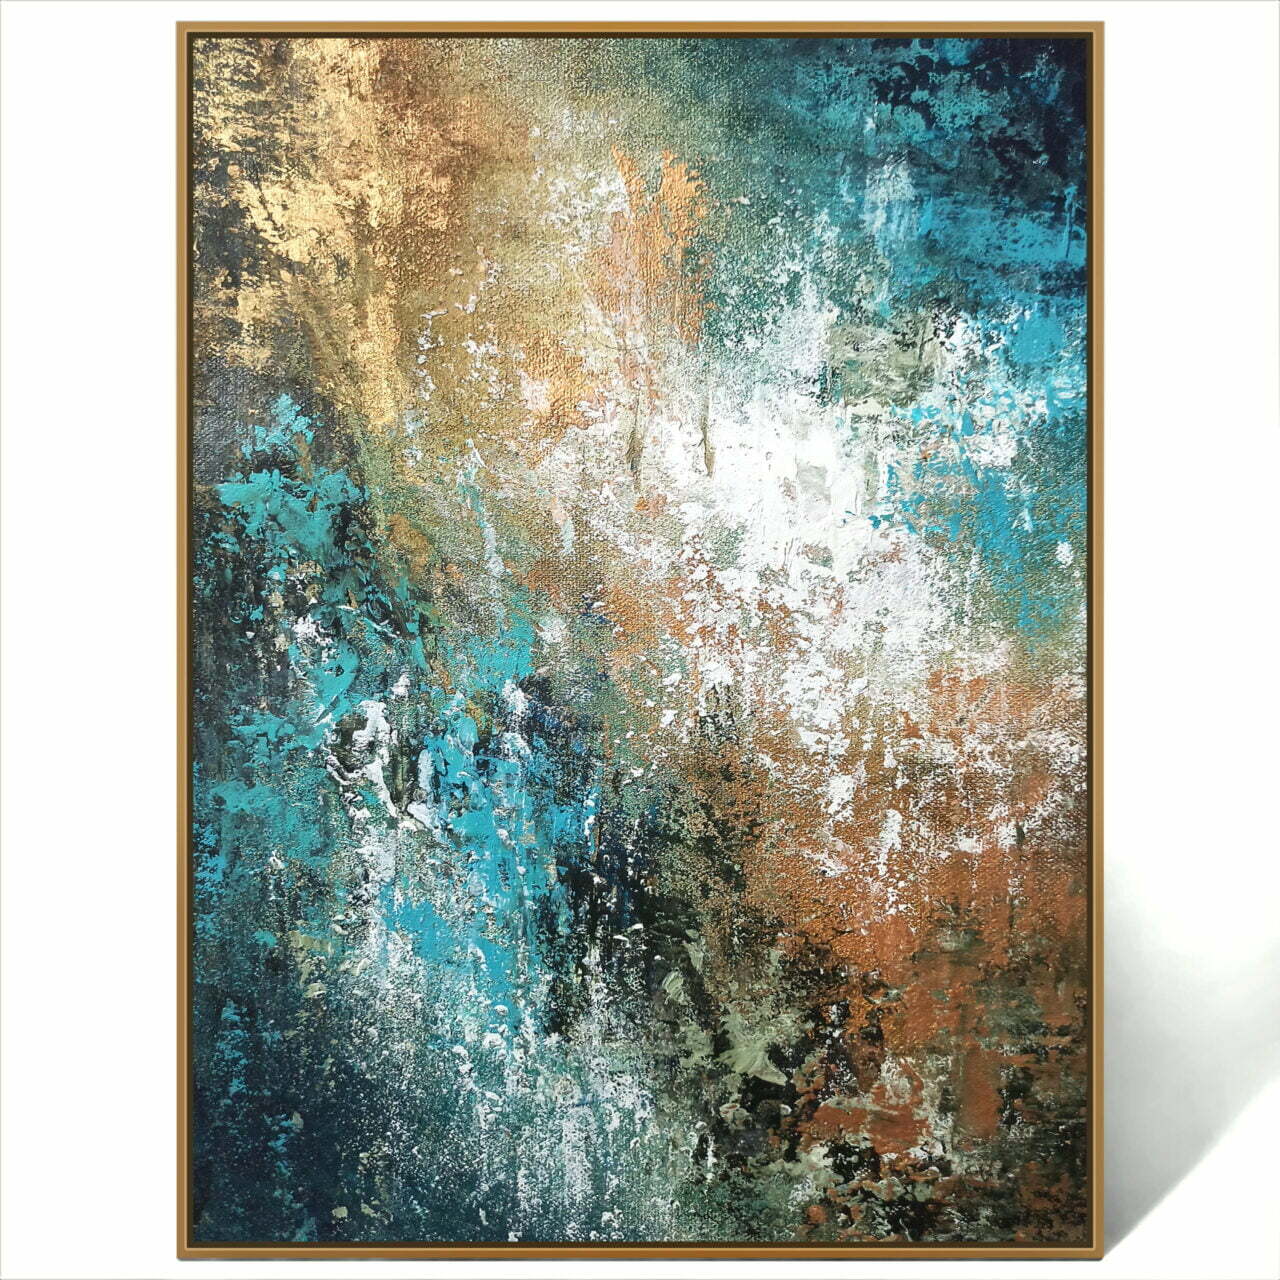 Oversized Gold And Blue Abstract Art Painting For Home Decor